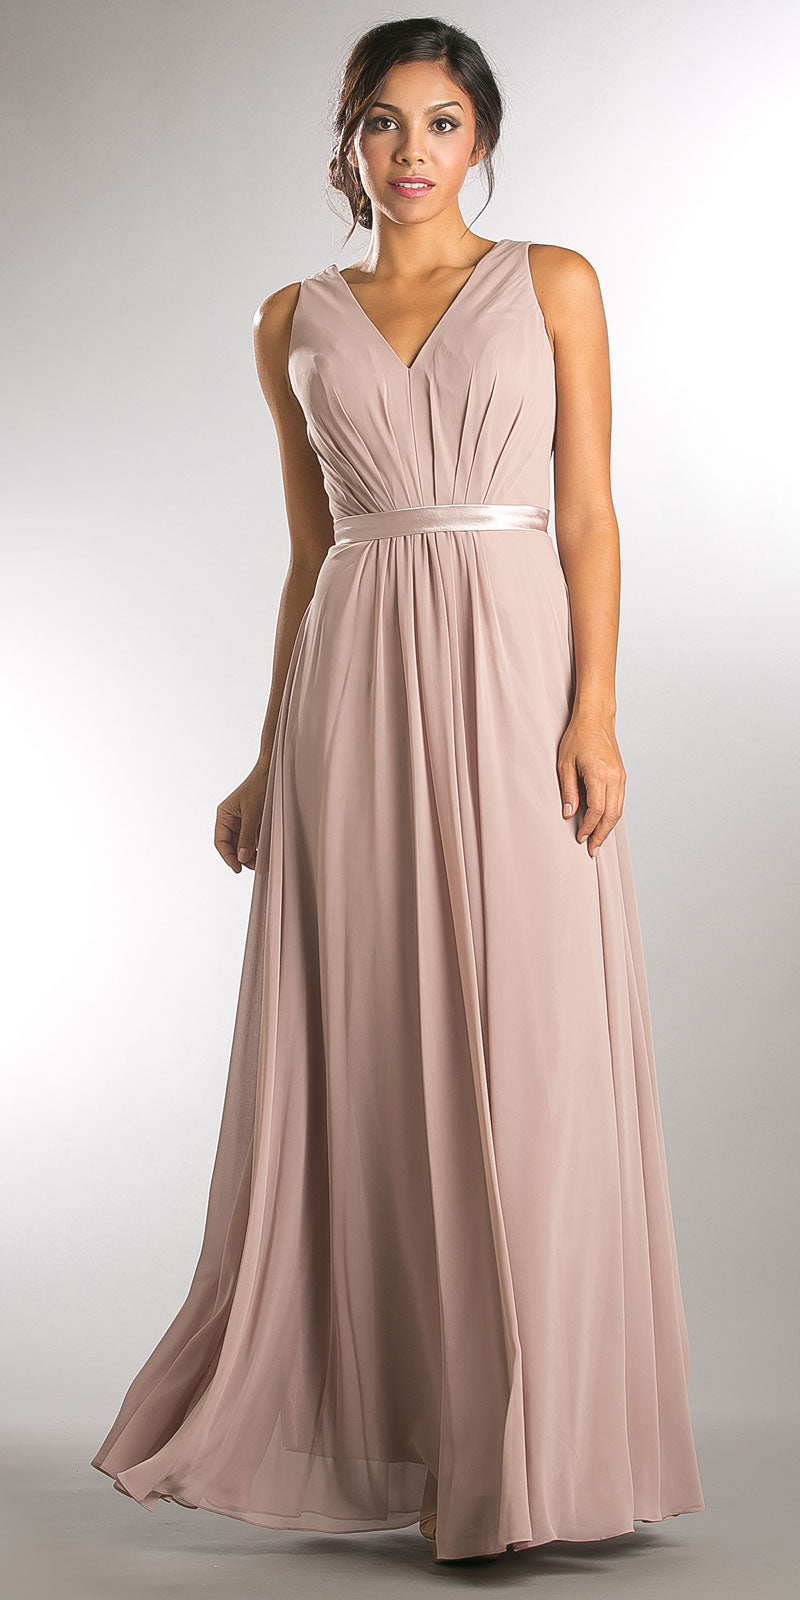 Image of V-neck Sleeveless Ruched Bodice Long Bridesmaid Dress in Taupe